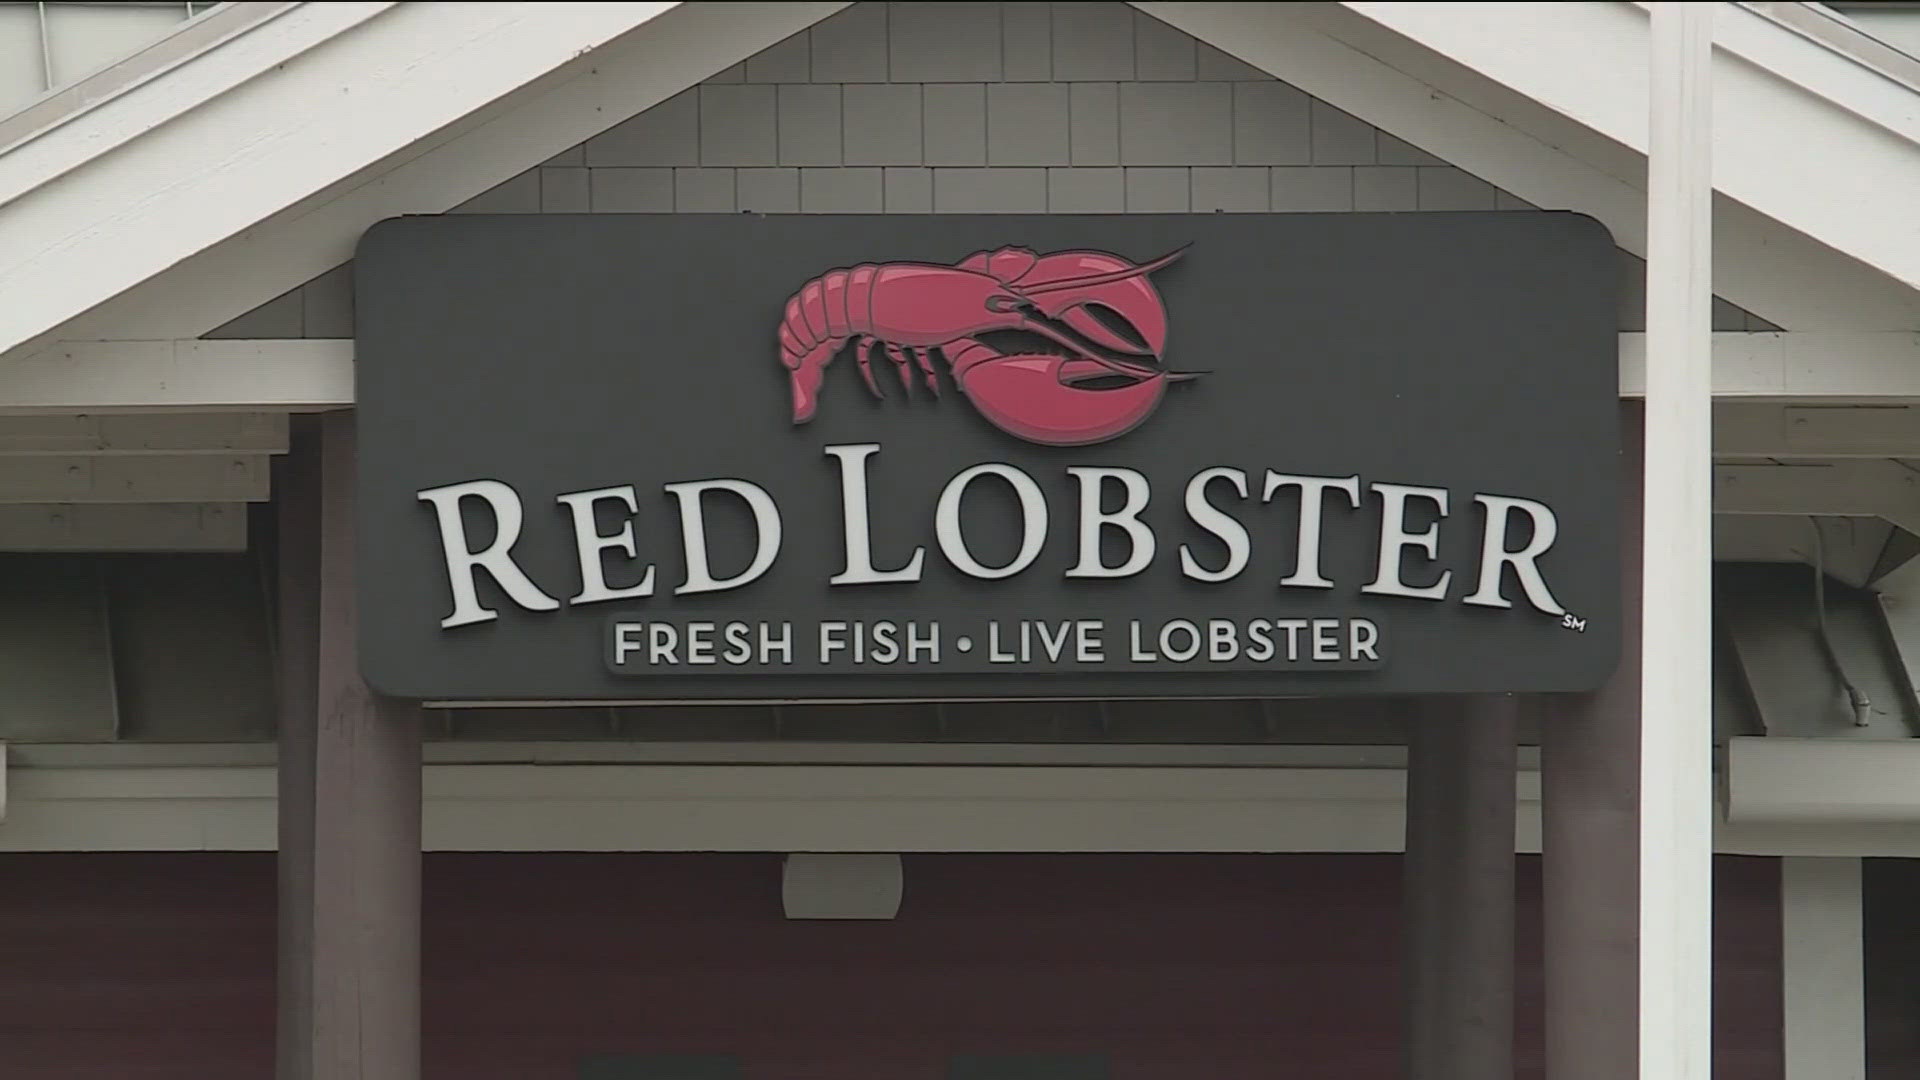 Promotions like the all-you-can-eat shrimp, meant to draw people to the restaurants, ended up hurting Red Lobster's bottom line.